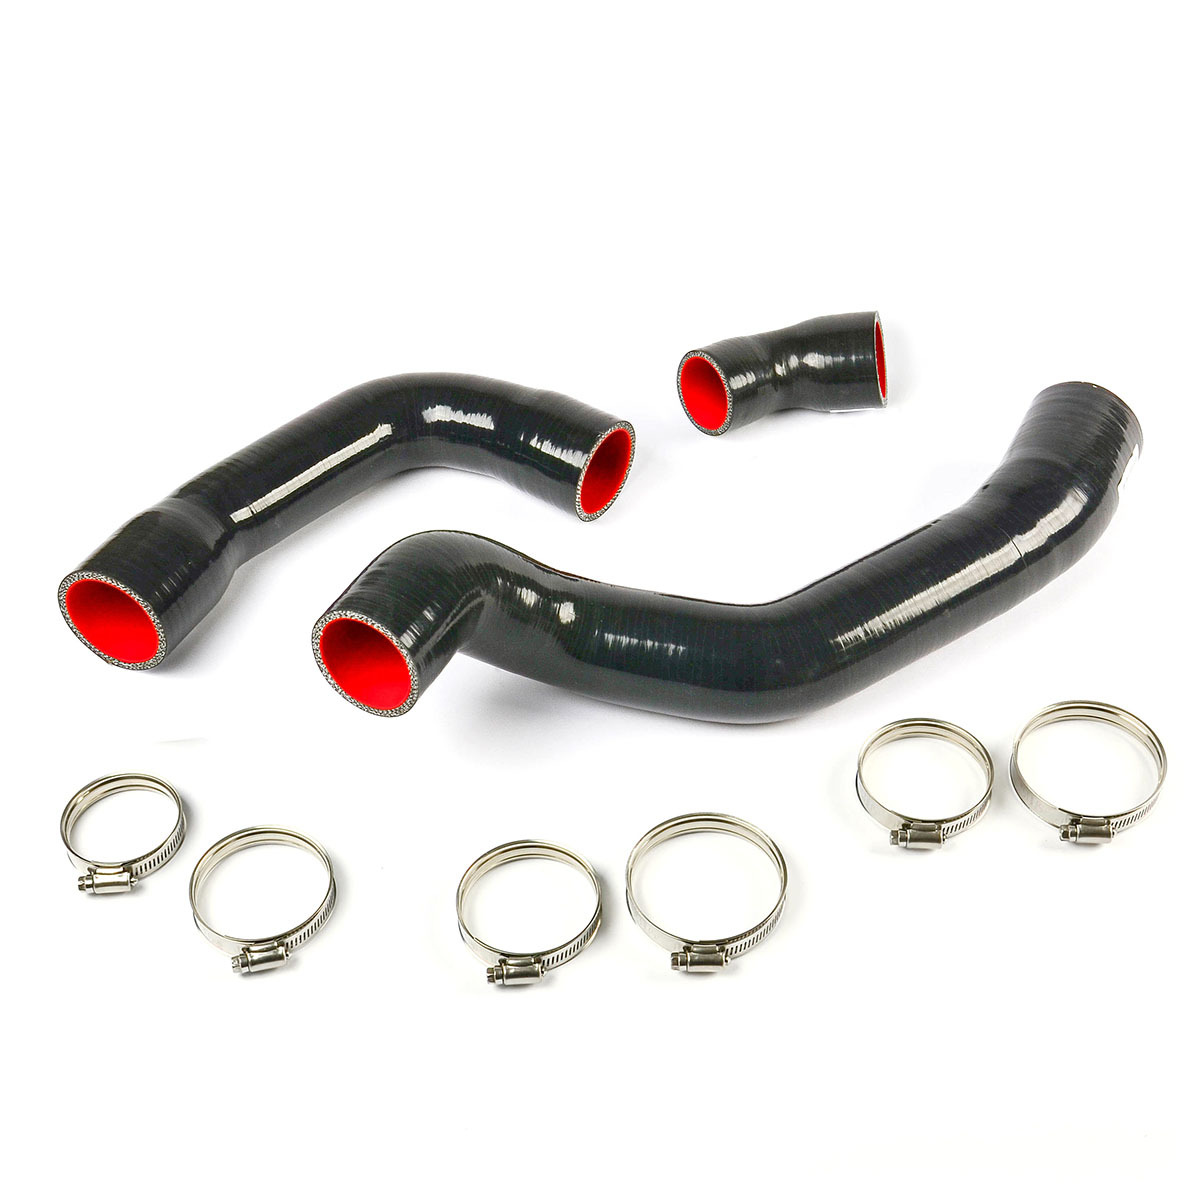 Ford Ranger/Mazda BT50 3.2L 3 Piece Silicone Hose and Clamp Intercooler Upgrade Kit 2011 - 2020